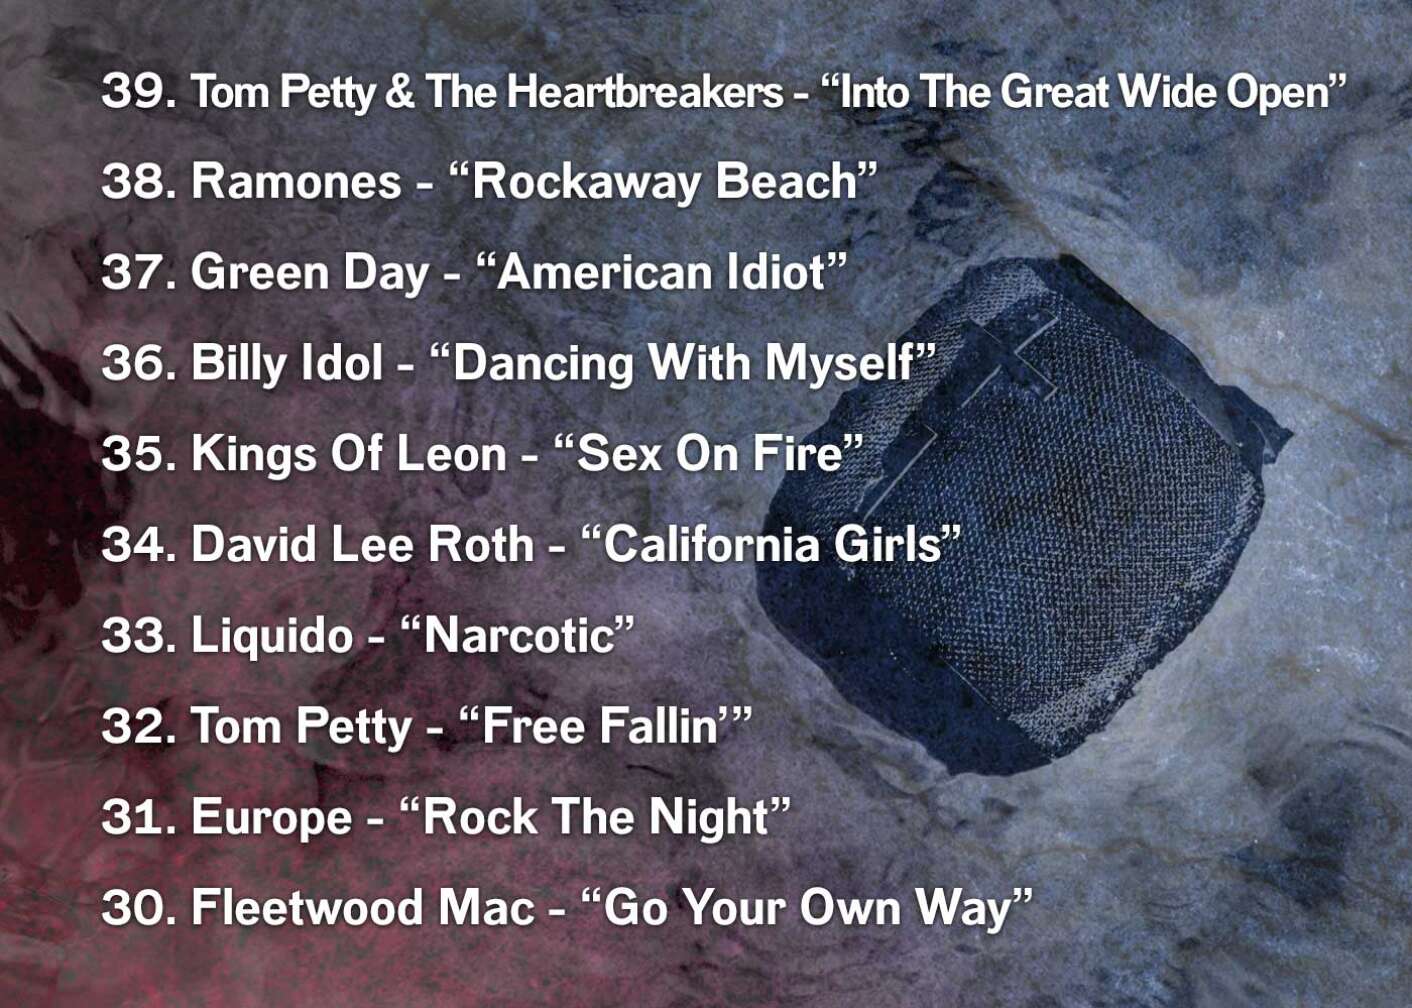 39. Tom Petty & The Heartbreakers - “Into The Great Wide Open” 38. Ramones - “Rockaway Beach” 37. Green Day - “American Idiot” 36. Billy Idol - “Dancing With Myself” 35. Kings Of Leon - “Sex On Fire” 34. David Lee Roth - “California Girls” 33. Liquido - “Narcotic” 32. Tom Petty - “Free Fallin’” 31. Europe - “Rock The Night” 30. Fleetwood Mac - “Go Your Own Way”